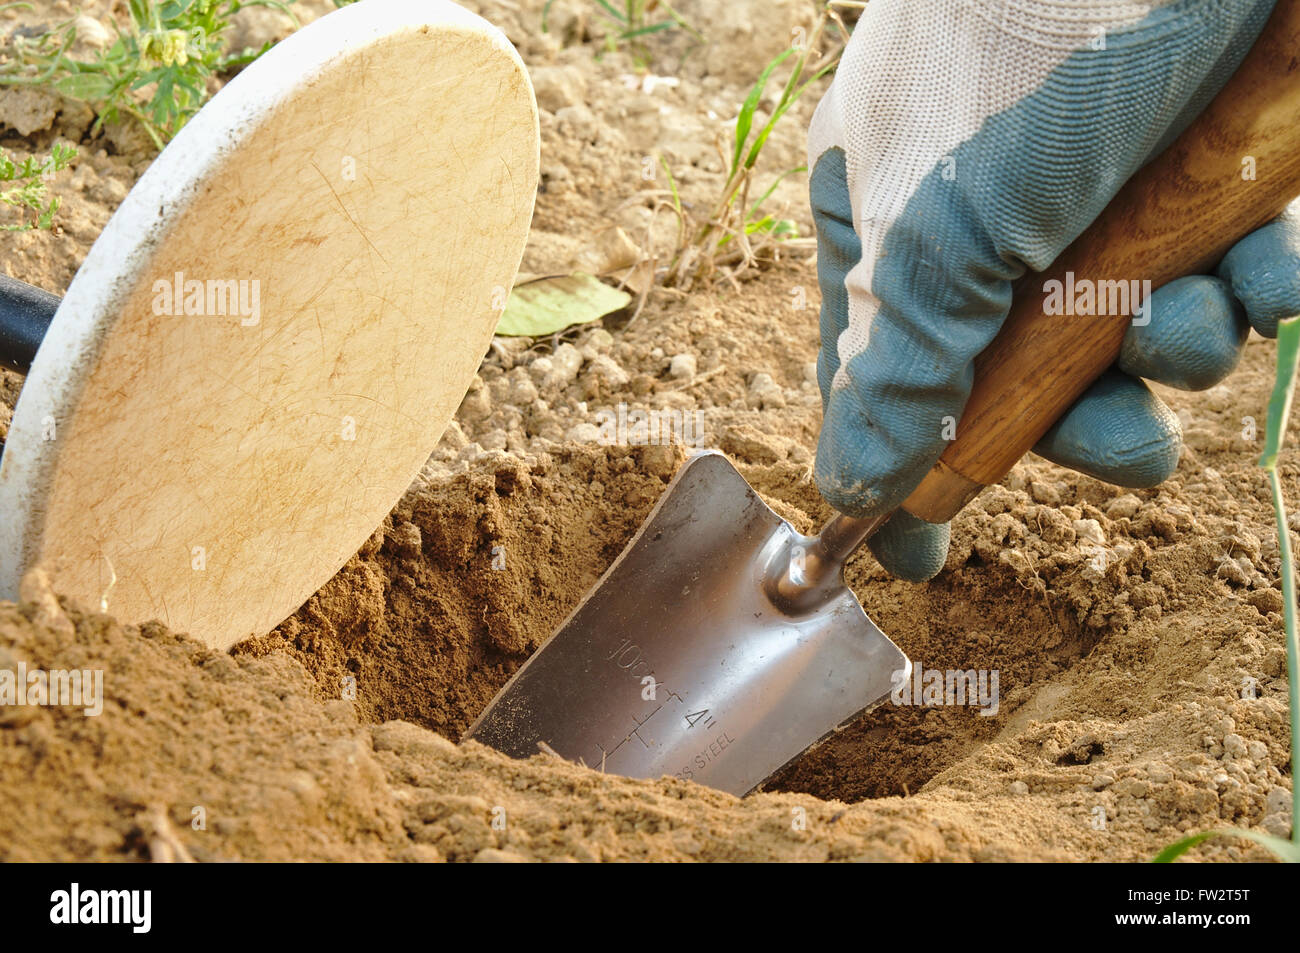 Metal detecting and treasure hunting. Metal detector, spade and gloves. Sports and hobbies theme Stock Photo